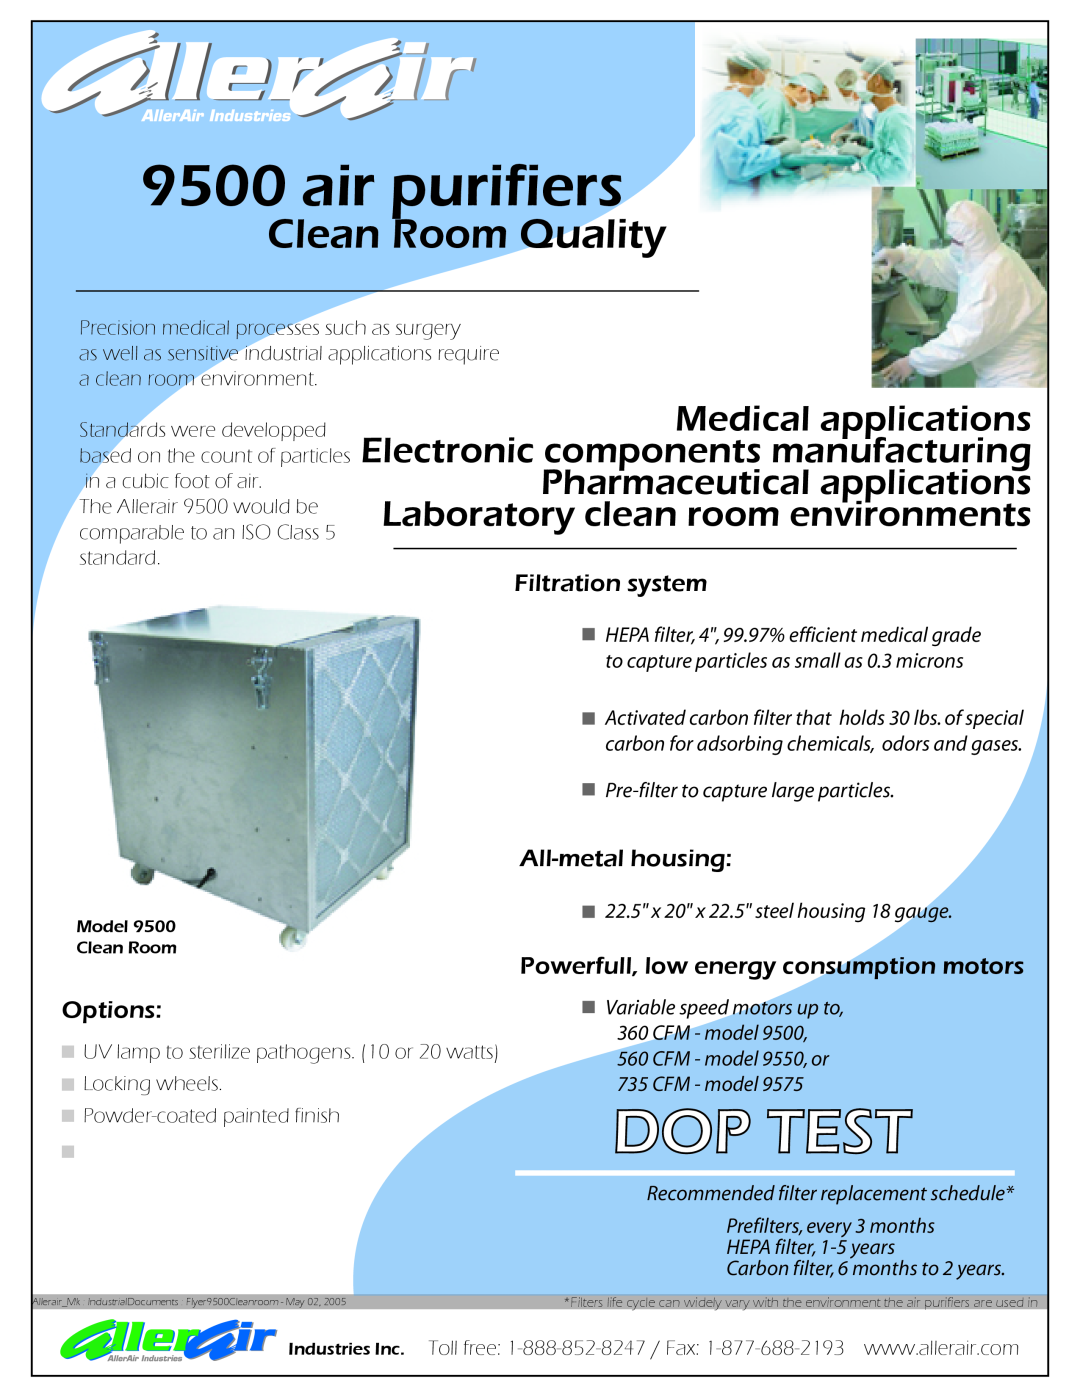 AllerAir 9500 manual Dop Test, air purifiers, Clean Room Quality, space for the pictures, Filtration system, Options 